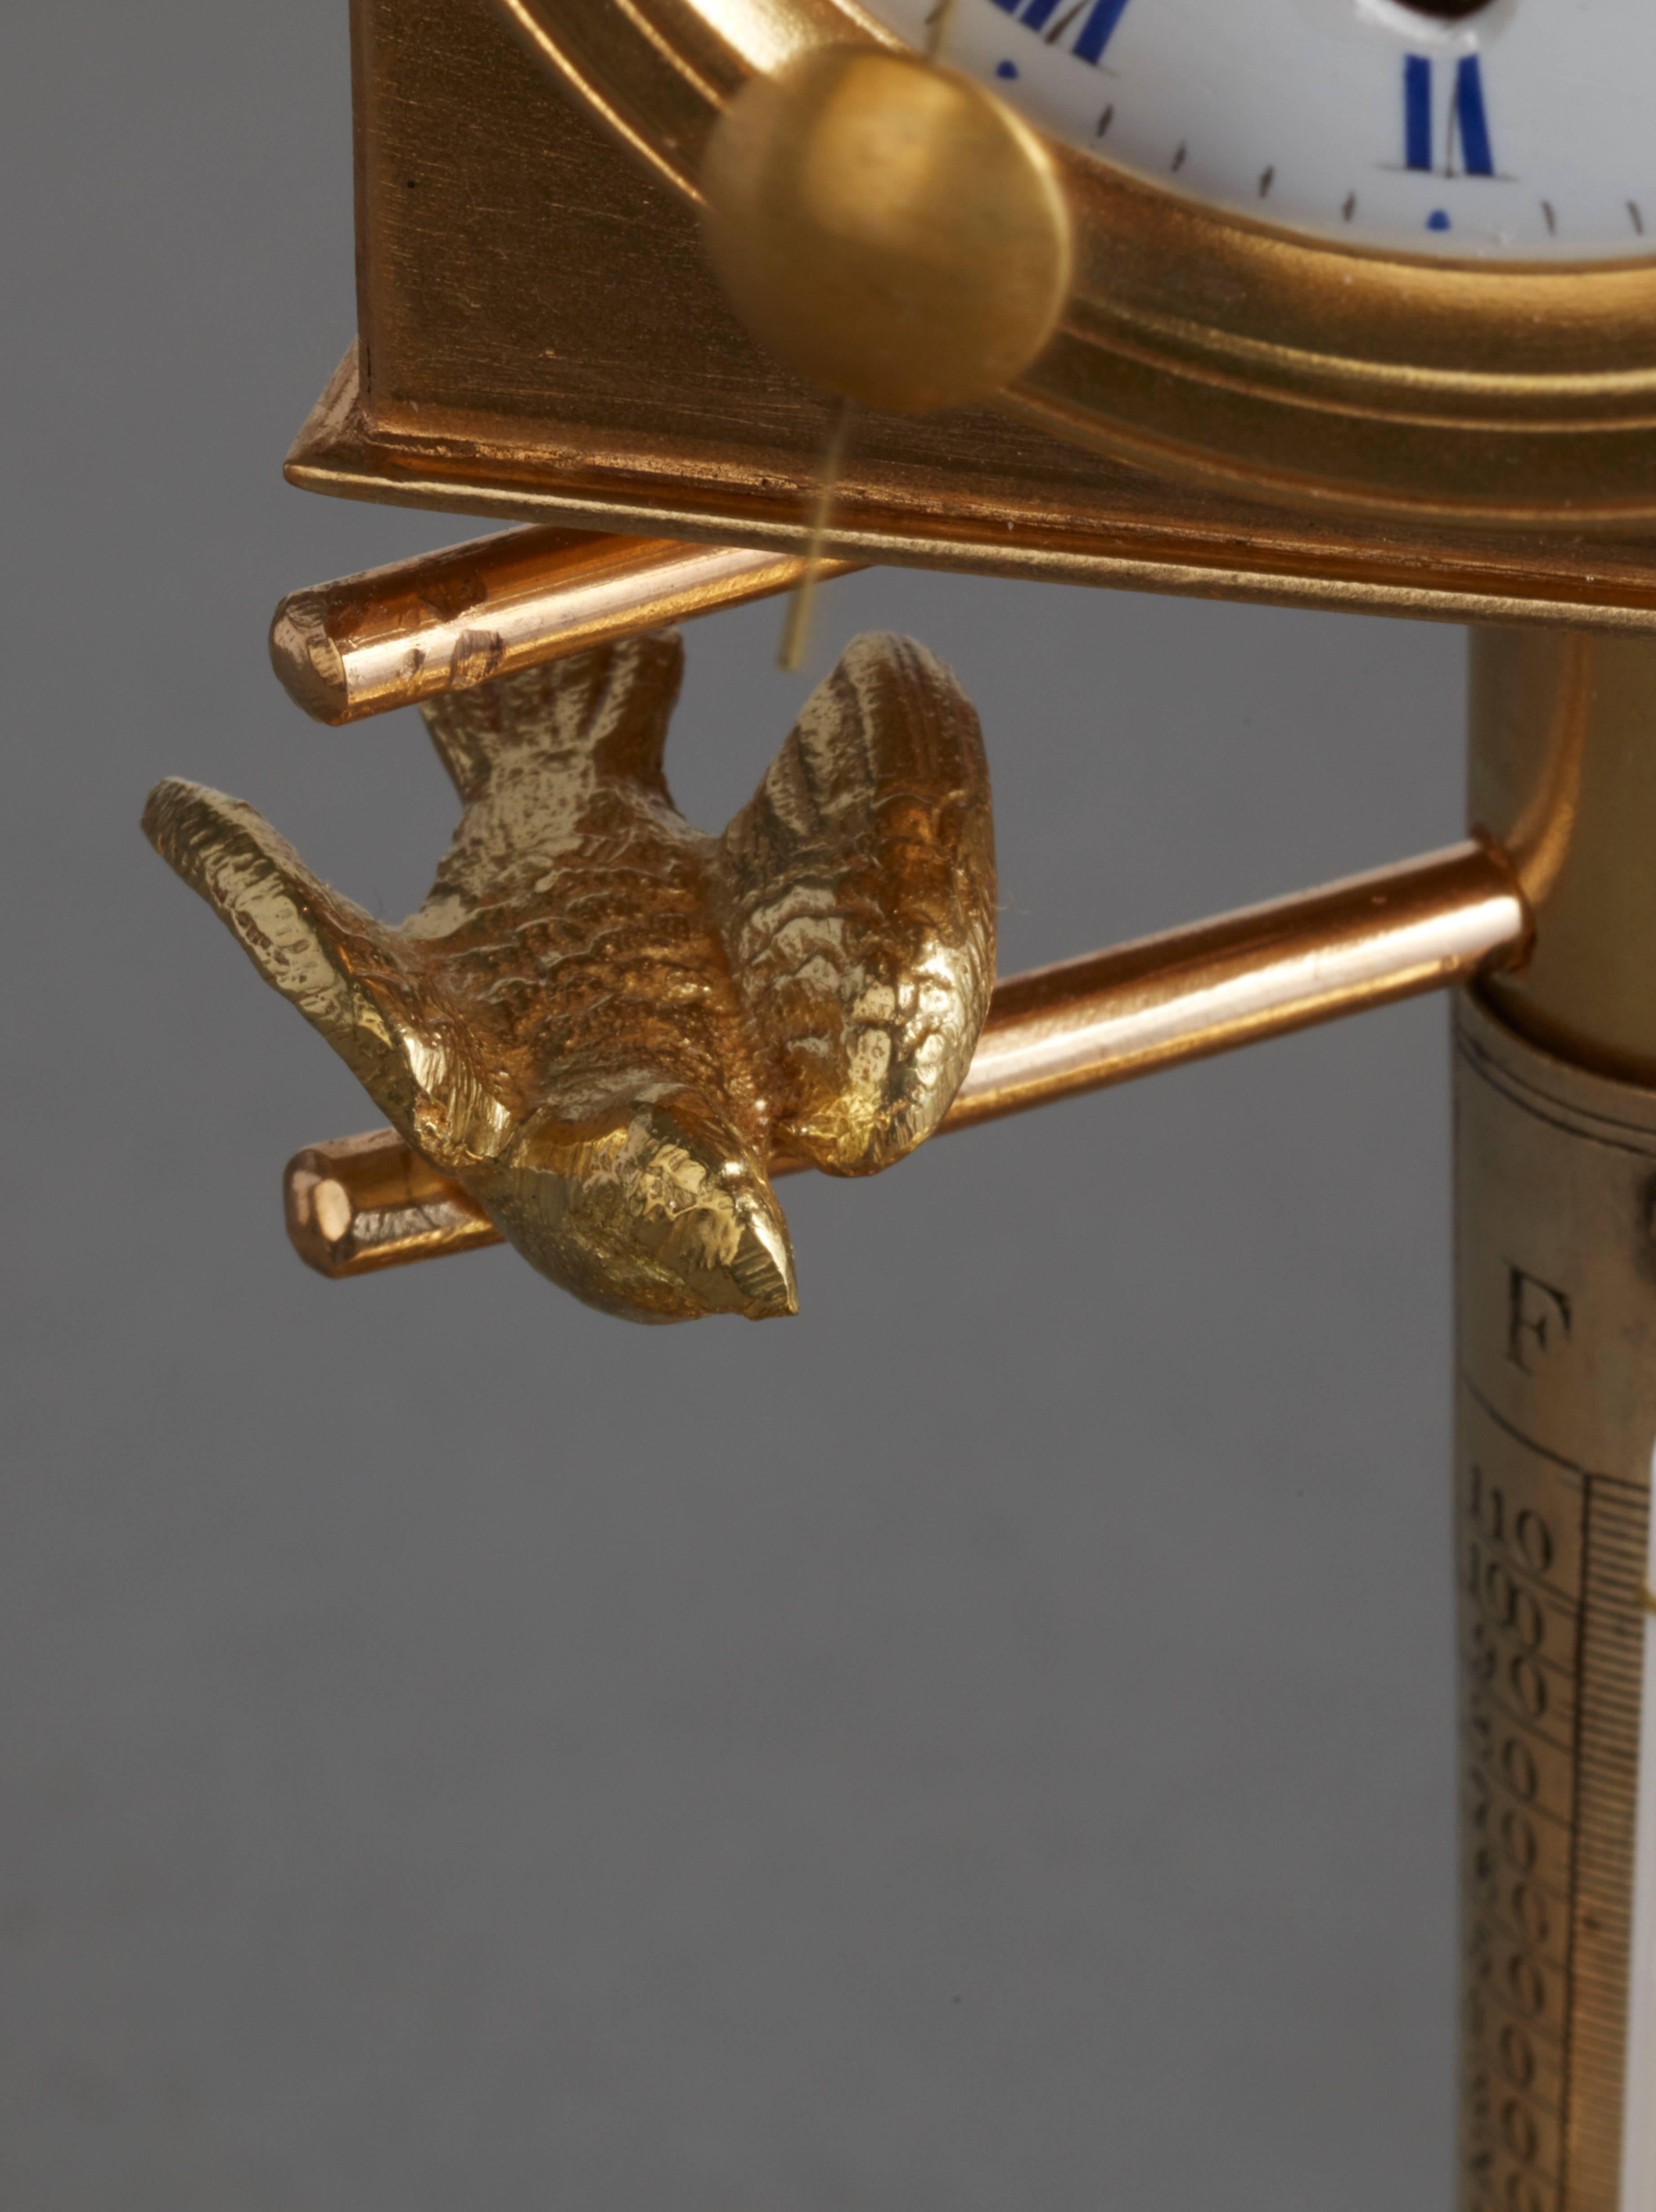 Desk inkwell with clock and ringing bell. The clock in the form of a bird case, two entrances for the birds on both sides of the clock sheltering the birds. The partly gilt and silvered bronze case. The fox trying to catch the birds on the base. On